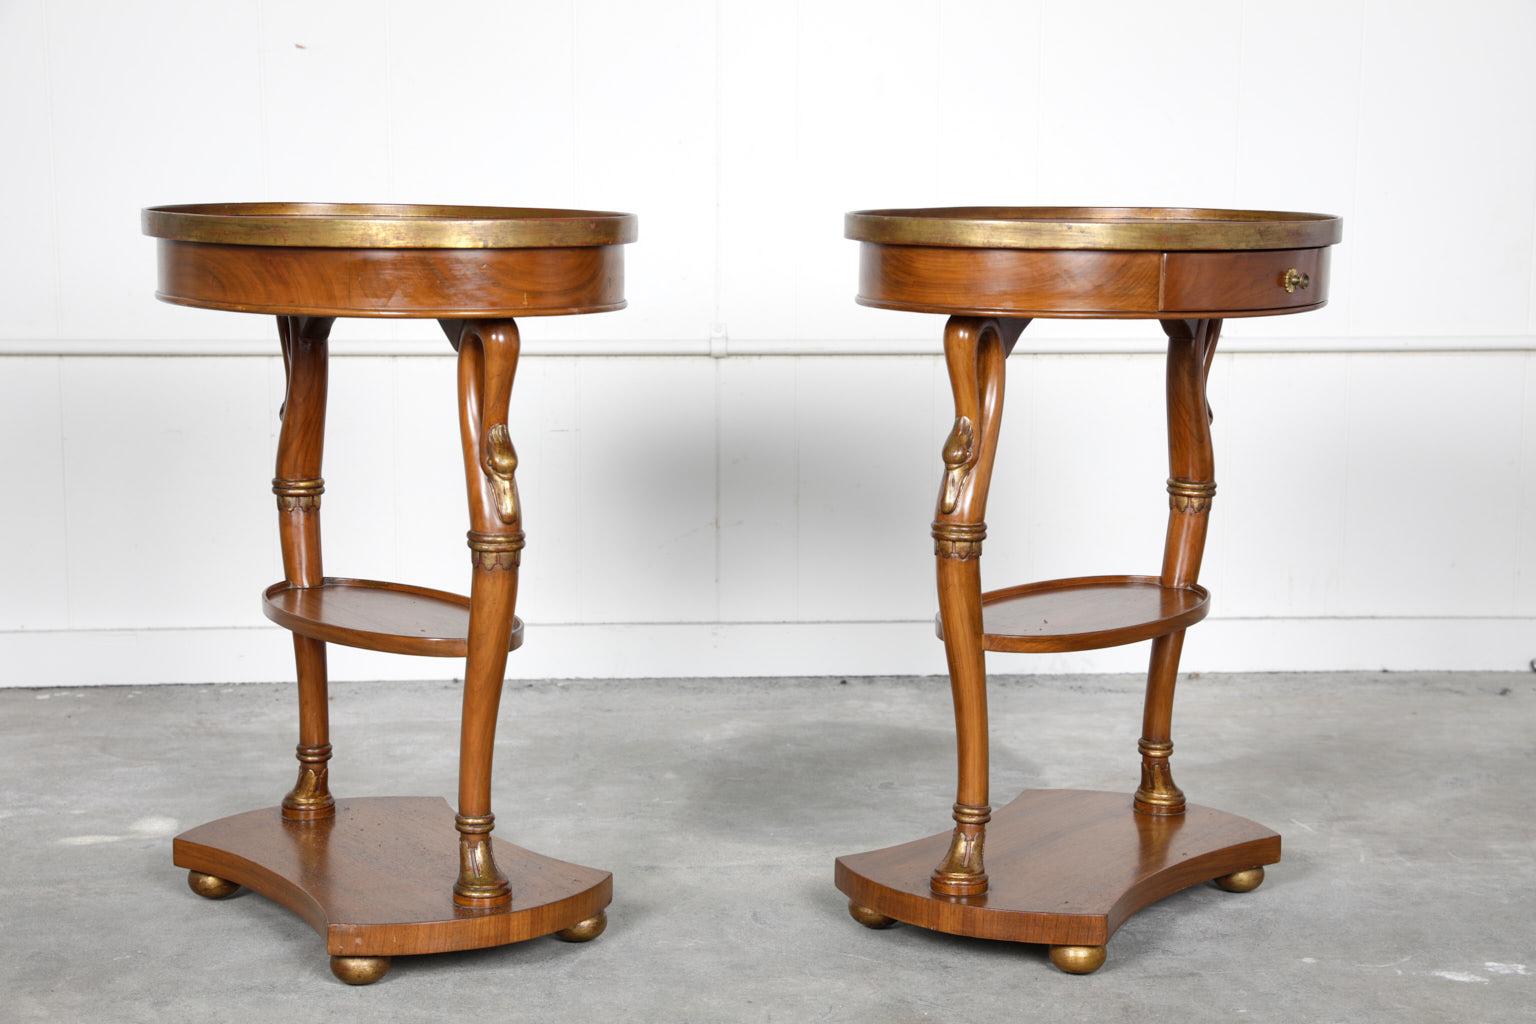 Elegant pair of 20th century walnut oval side tables with gilt accents in the style of French Directoire. The table’s frieze contains a paper-lined single drawer over figural swan carved legs. The table legs also support a shelf stretcher and